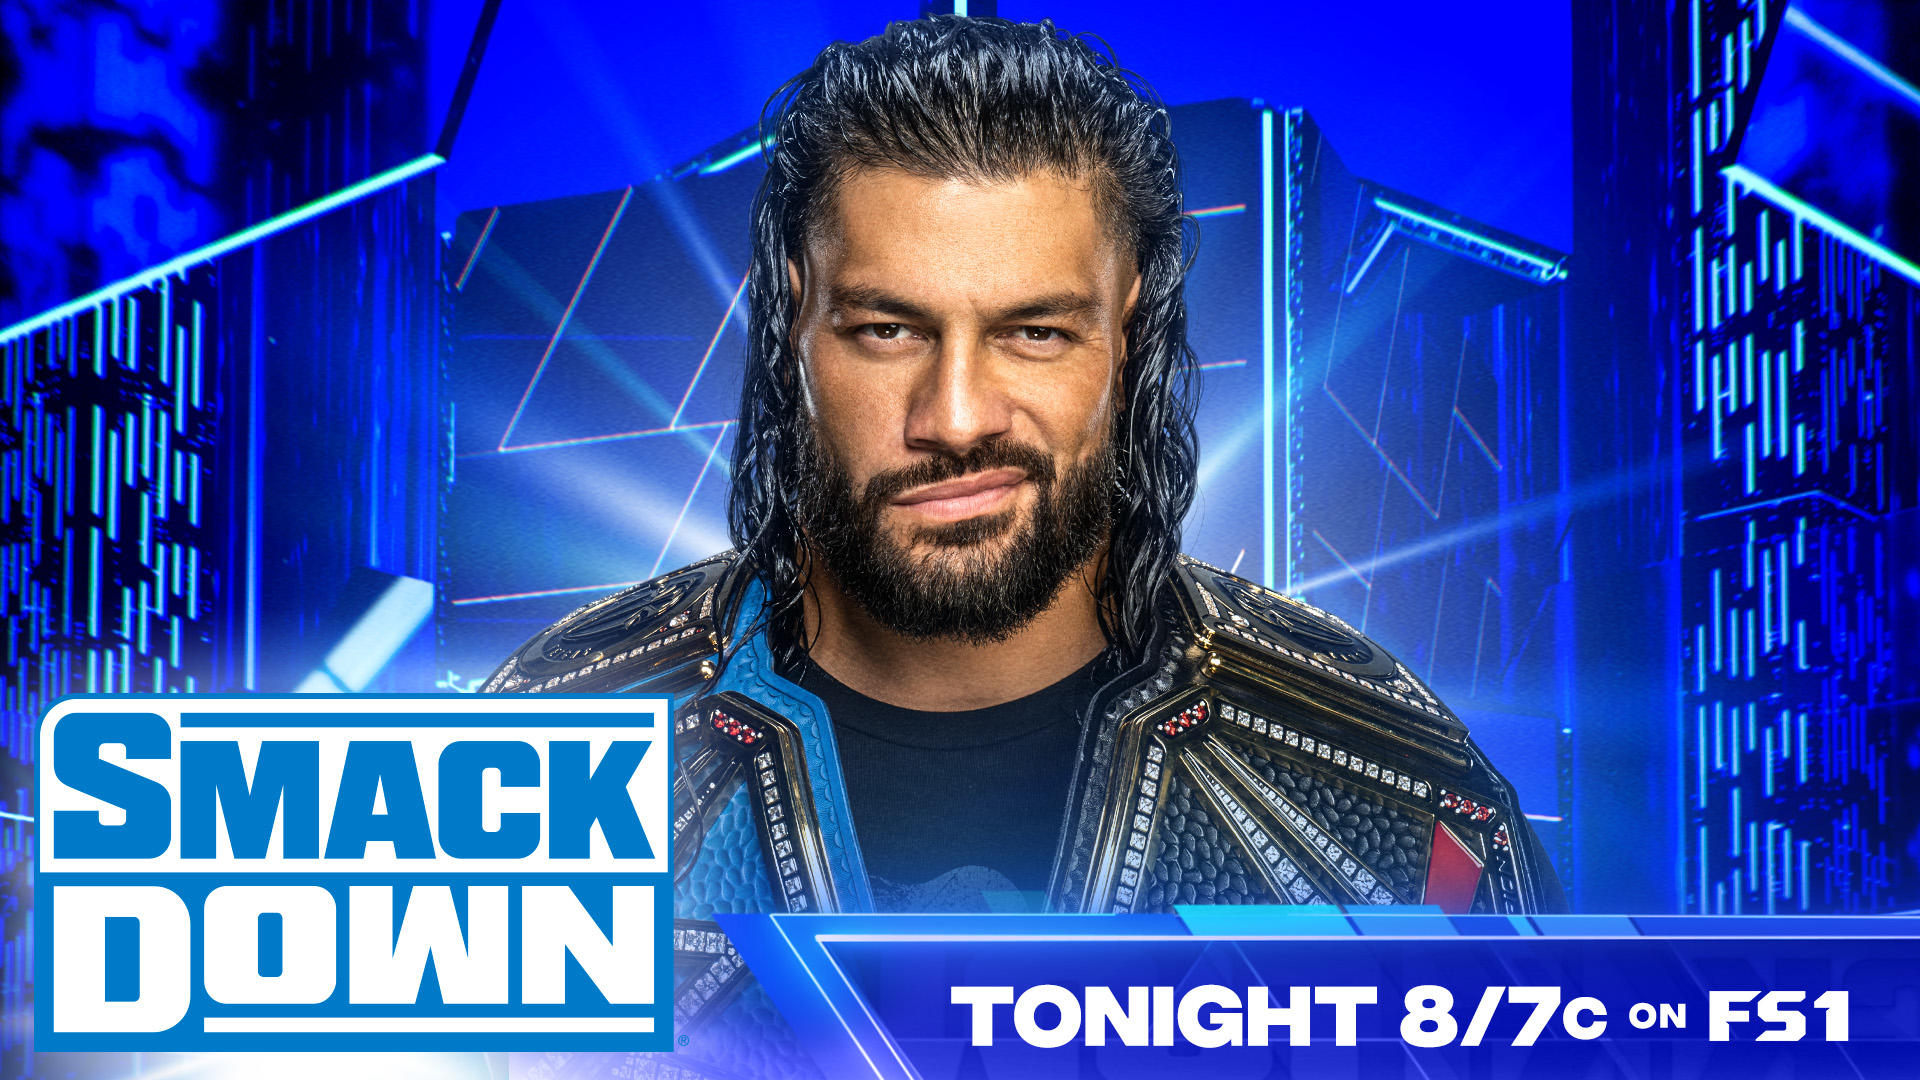 WWE SmackDown Preview for Tonight Top Star to Defend, Next Weeks Episode to Tape, More